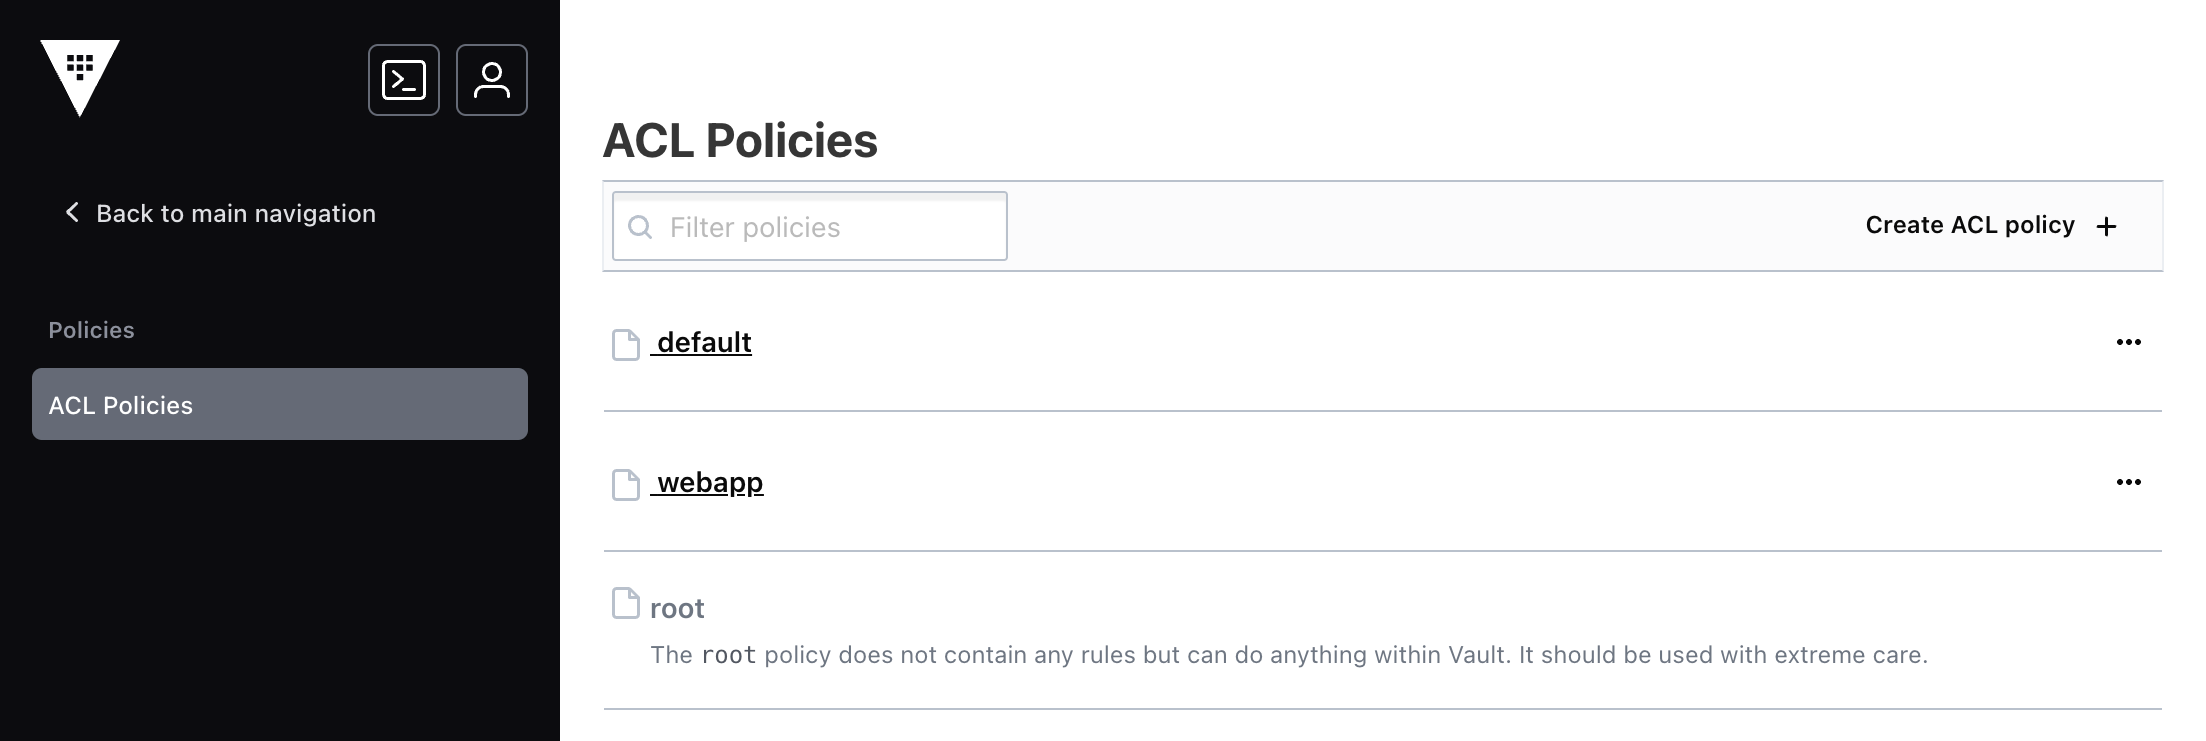 policy index with new
policy